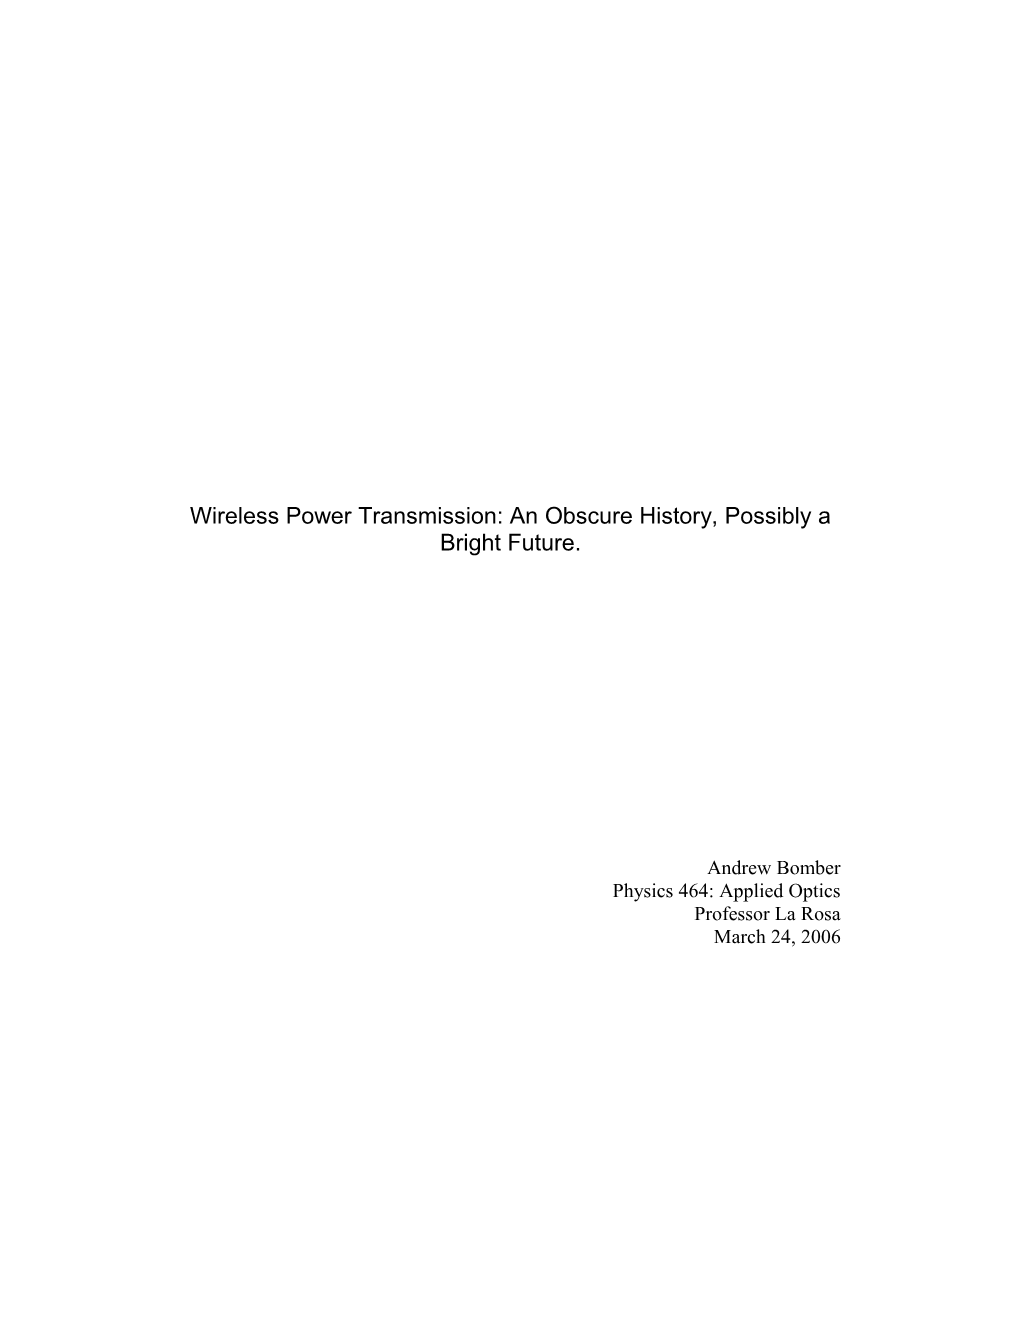 Wireless Power Transmission: an Obscure History, Possibly a Bright Future